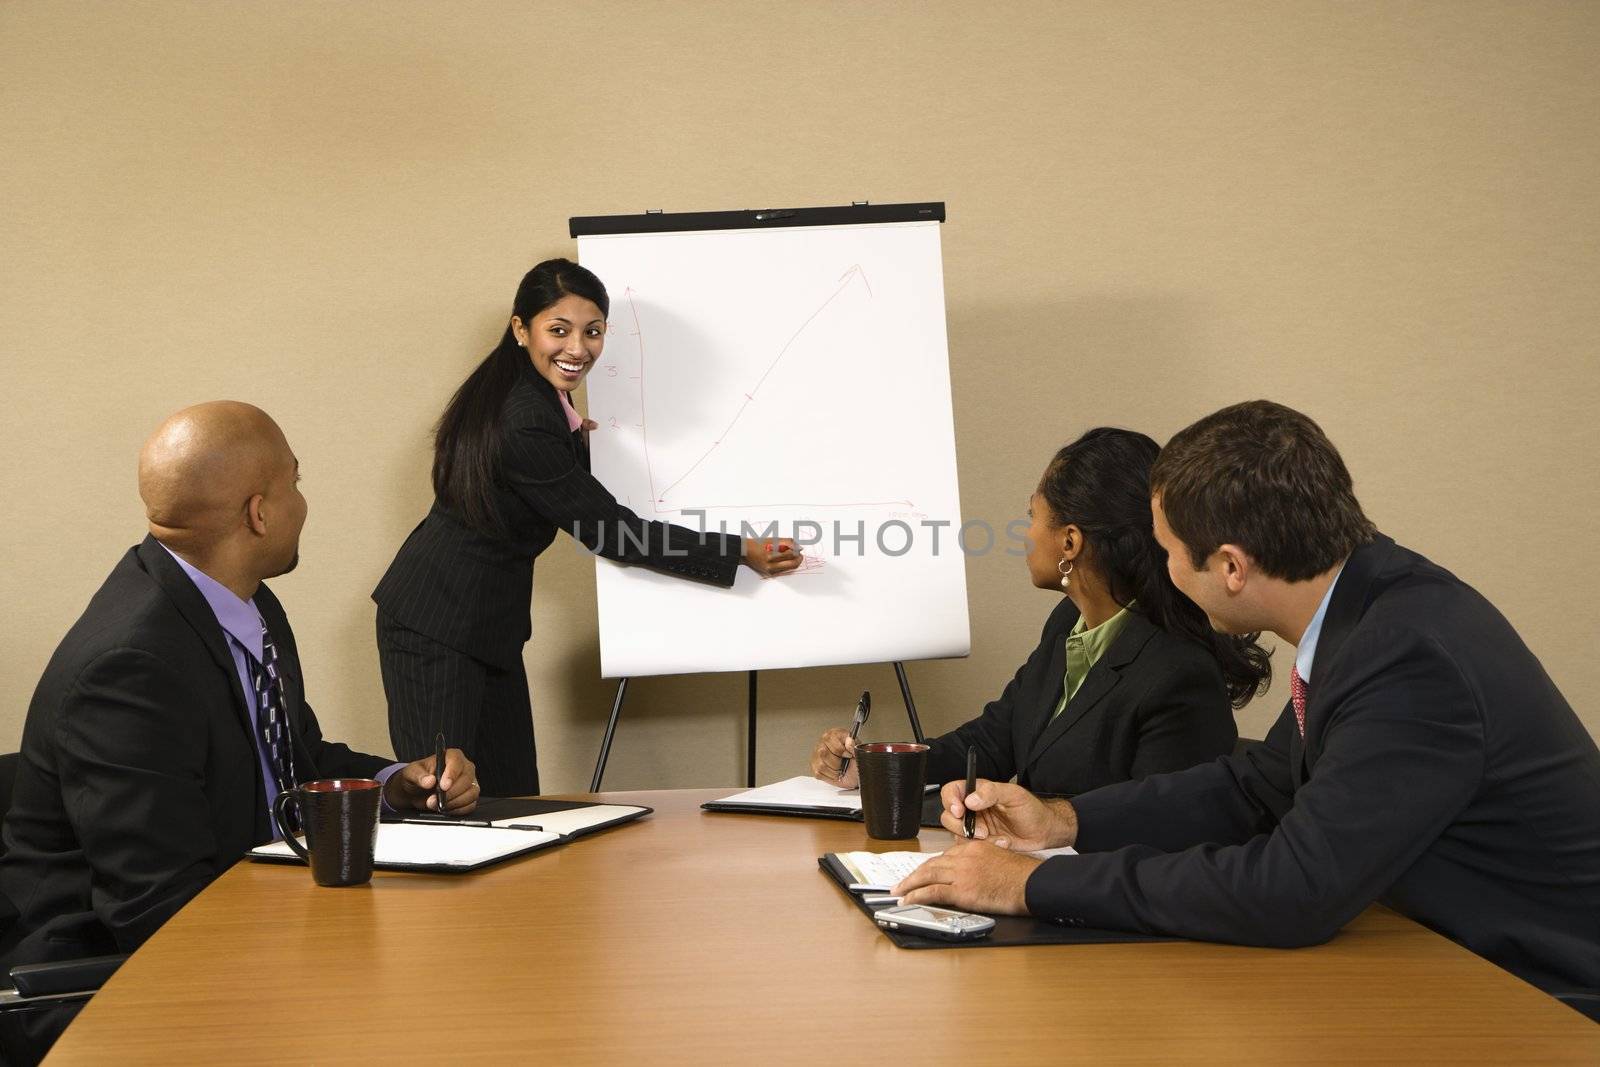 Businesspeople sitting at conference table smiling while businesswoman gives presentation.